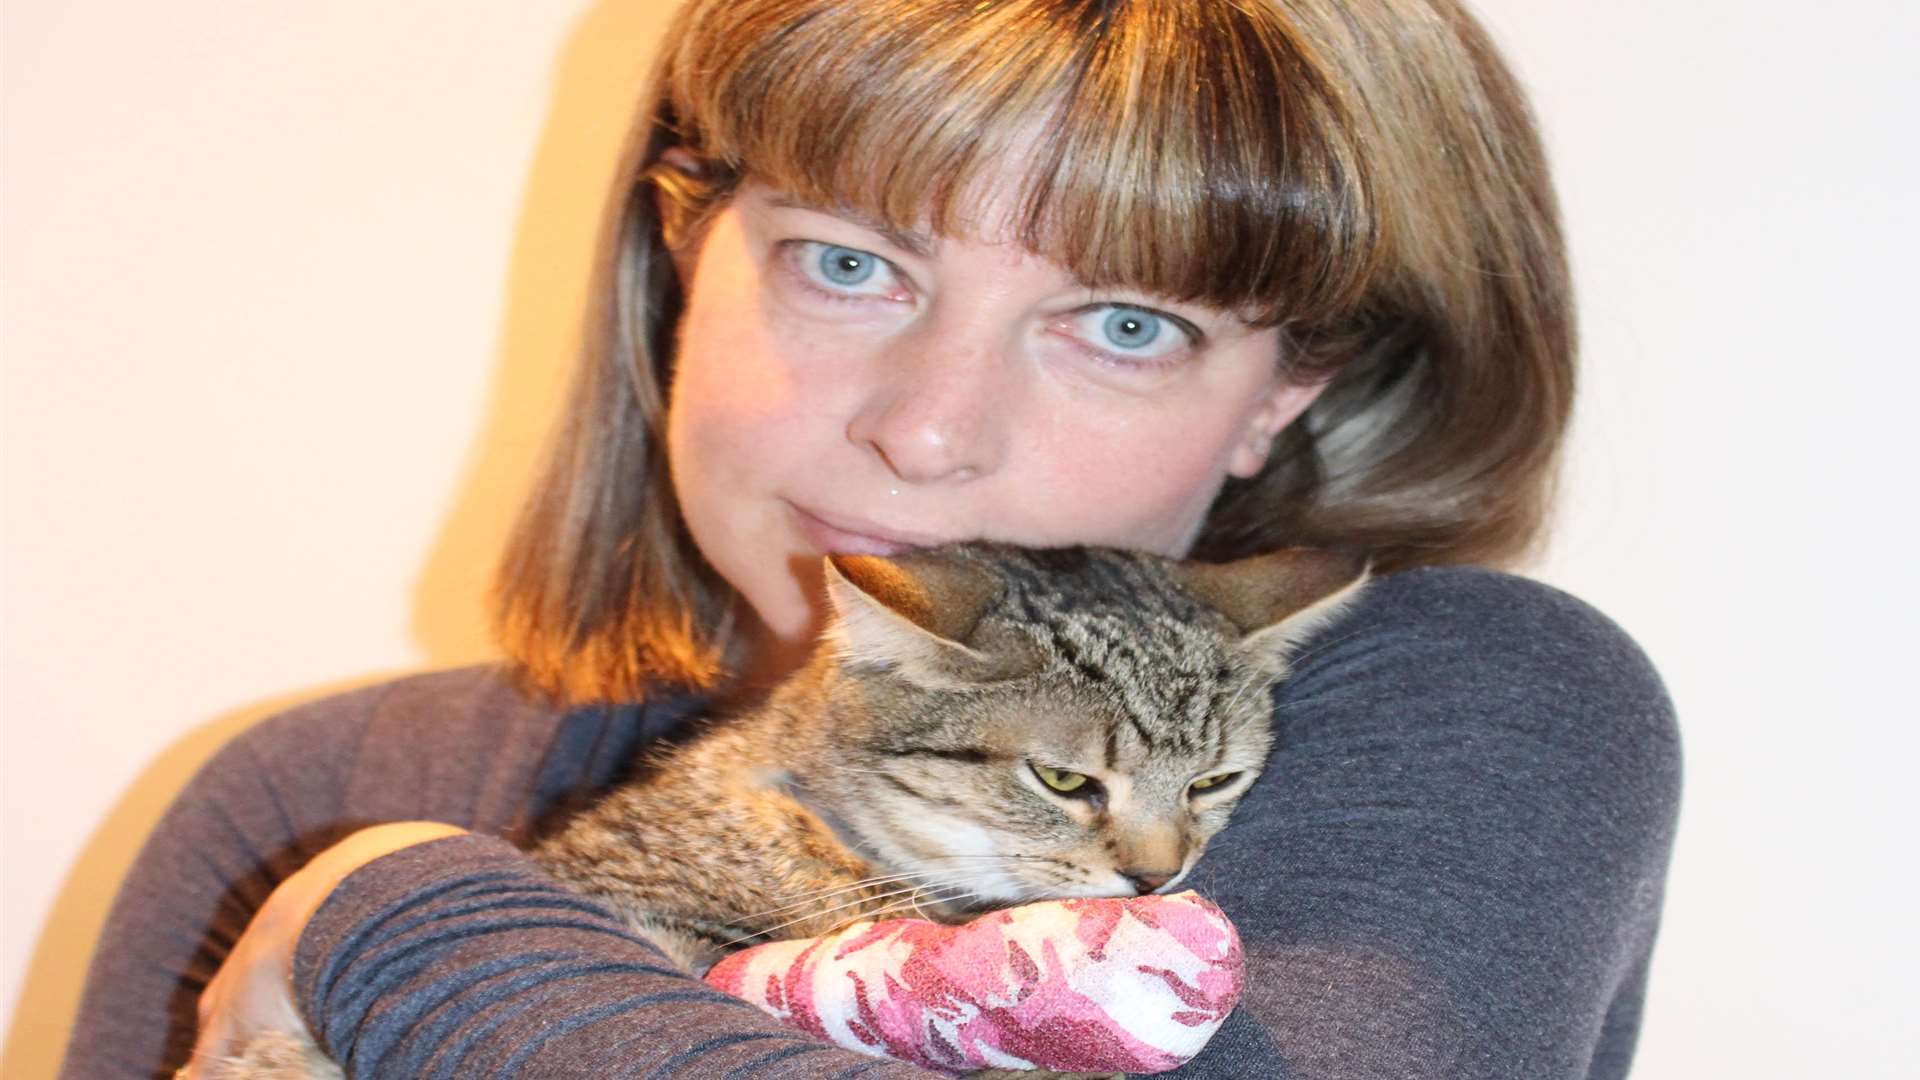 Catherine Cooper with her cat Sandy